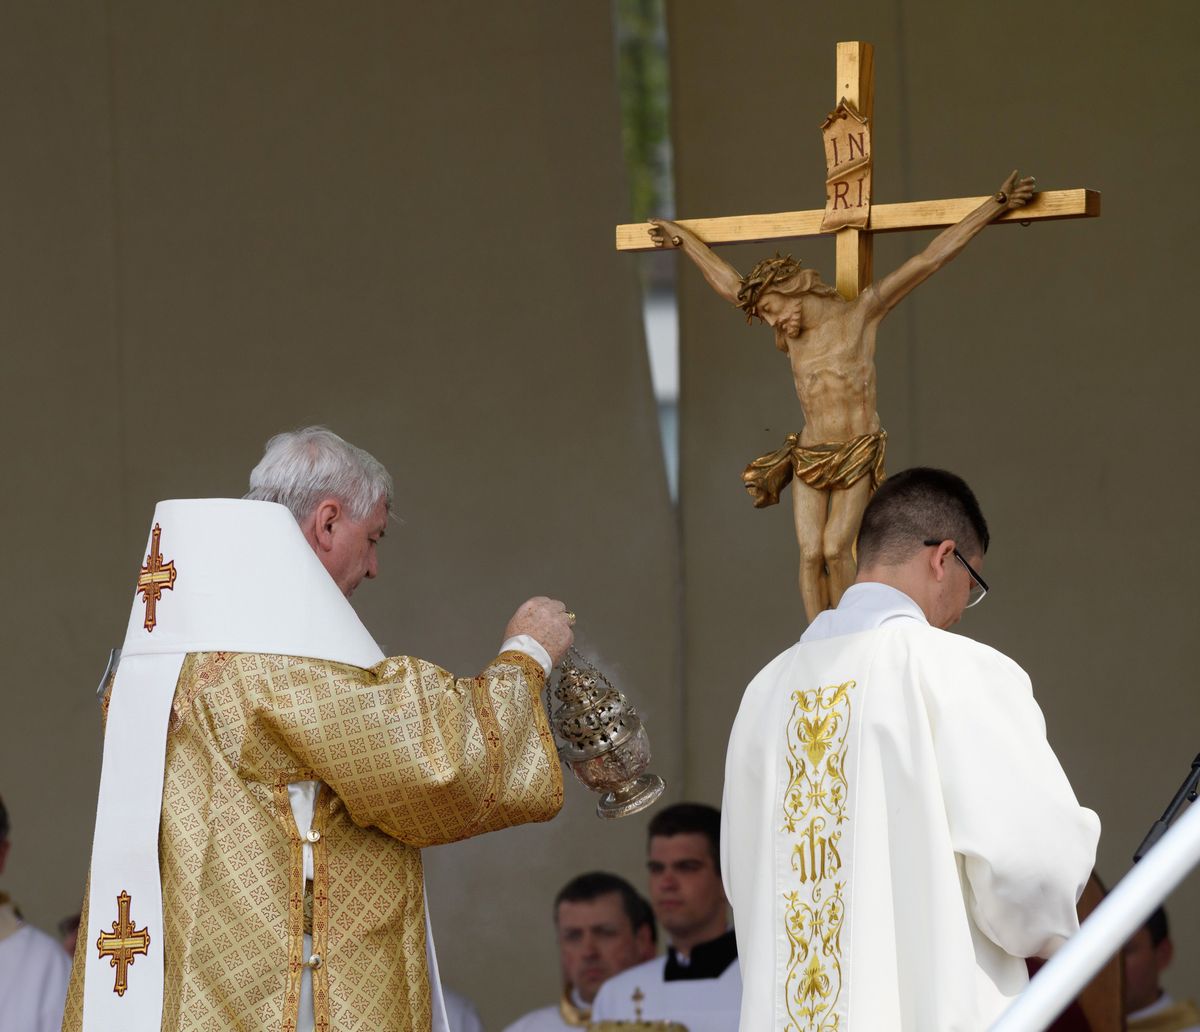 Archbishop at National Pilgrimage: Slovakia Needs Leaders Pursuing Truth